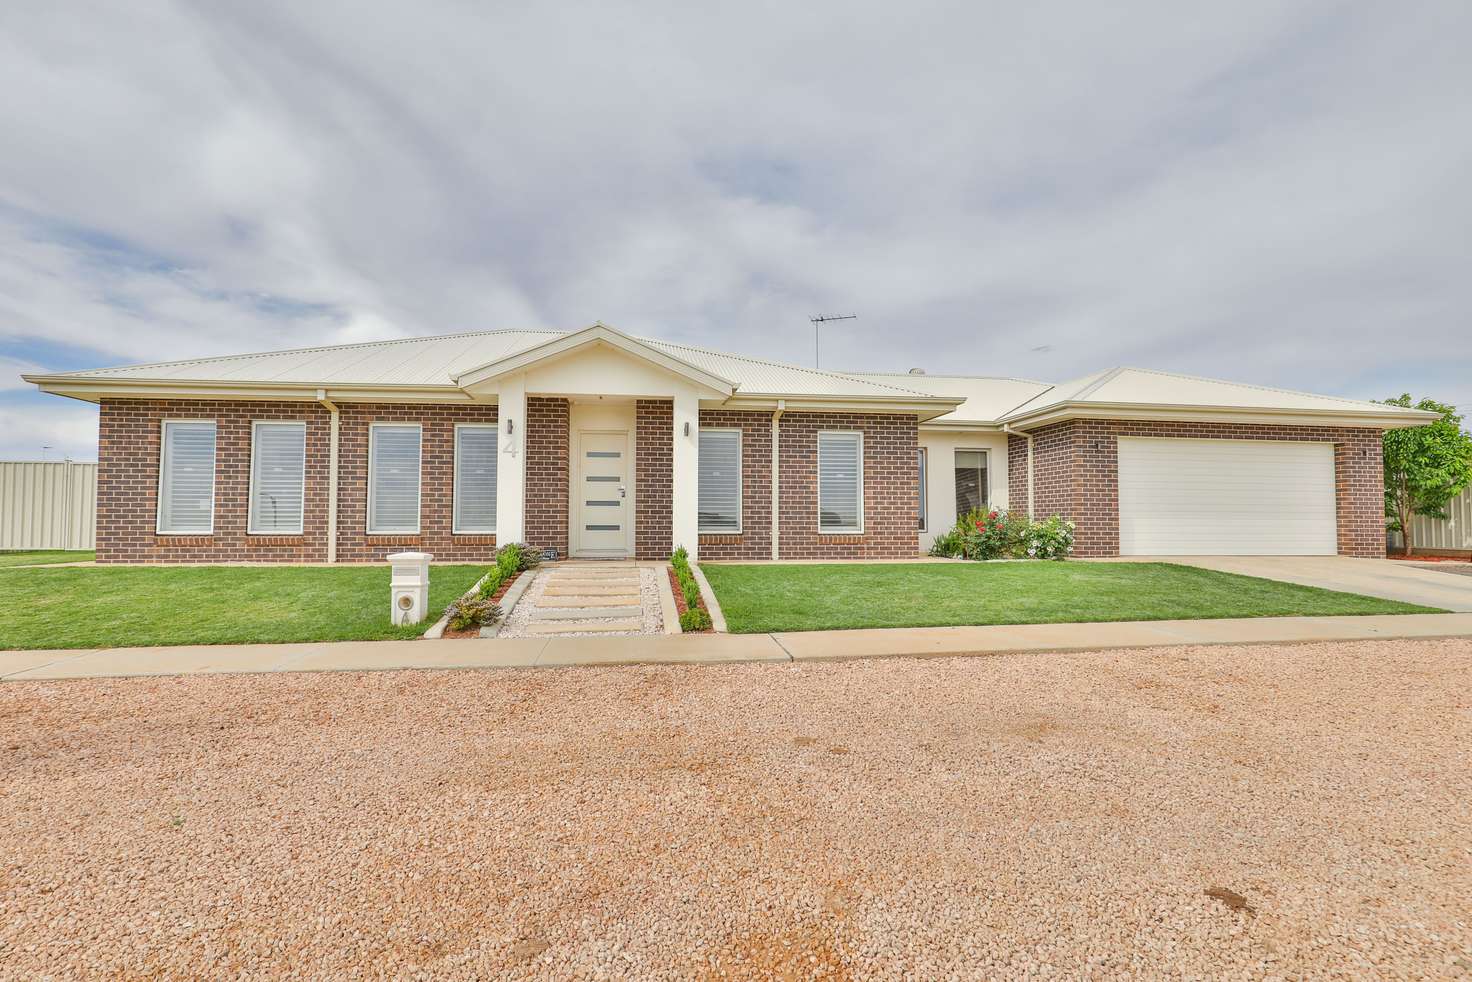 Main view of Homely house listing, 4 Clancy Way, Mildura VIC 3500